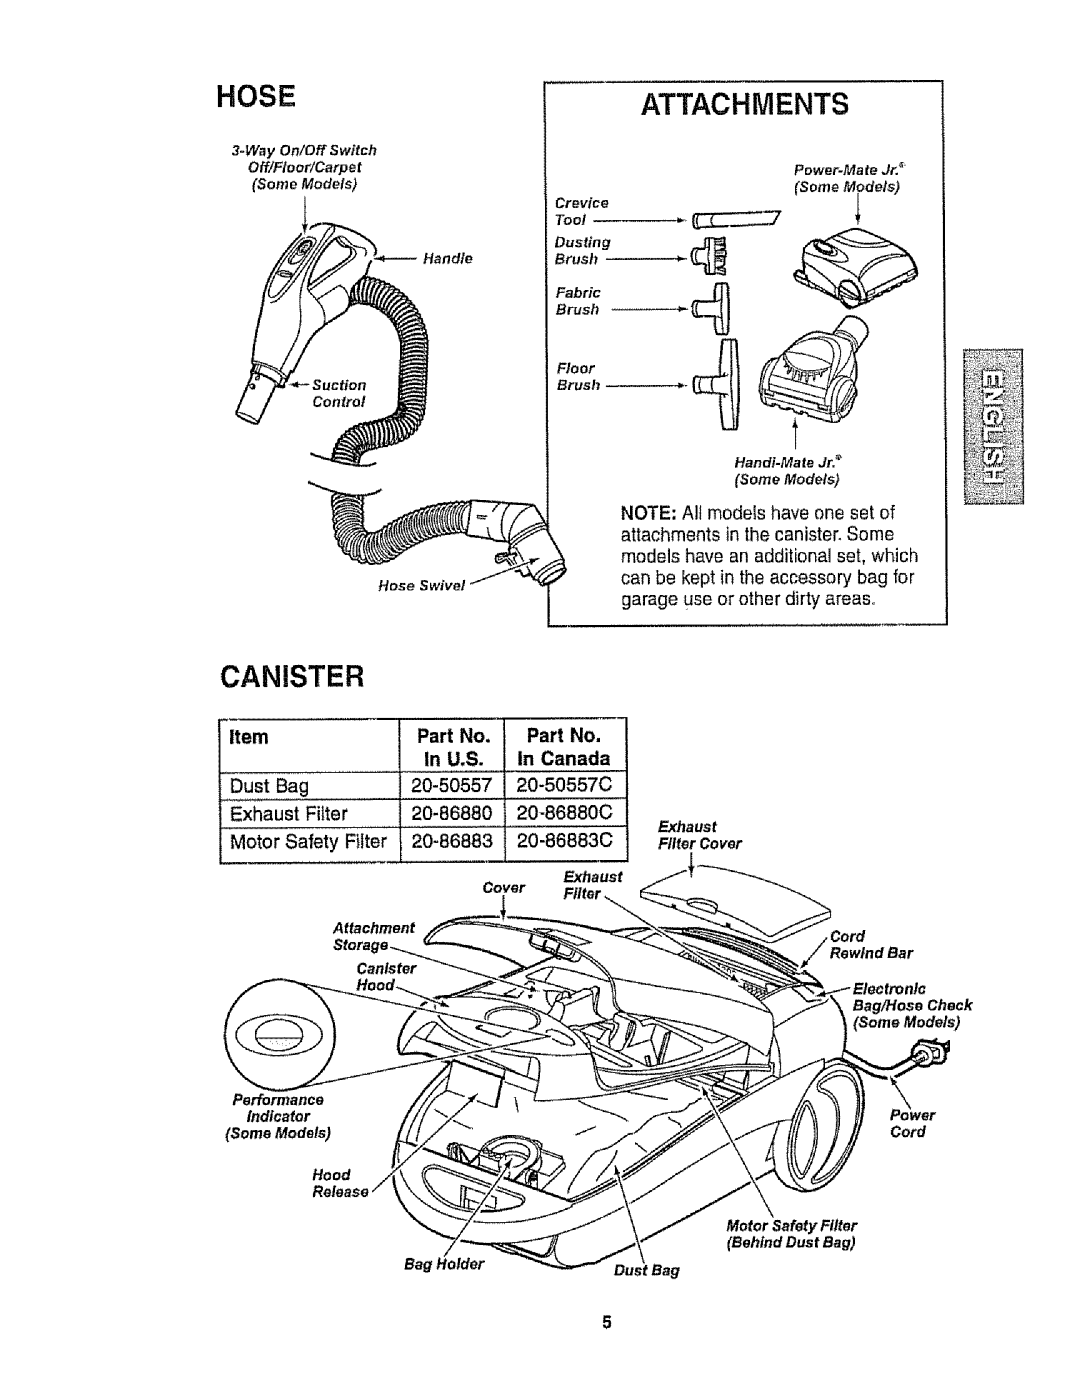 Kenmore 116.22812 Hose, Attachments, Canister, Item, Part No, In Canada, Dust Bag, 20-50557C, Exhaust Filter, 20-86880C 